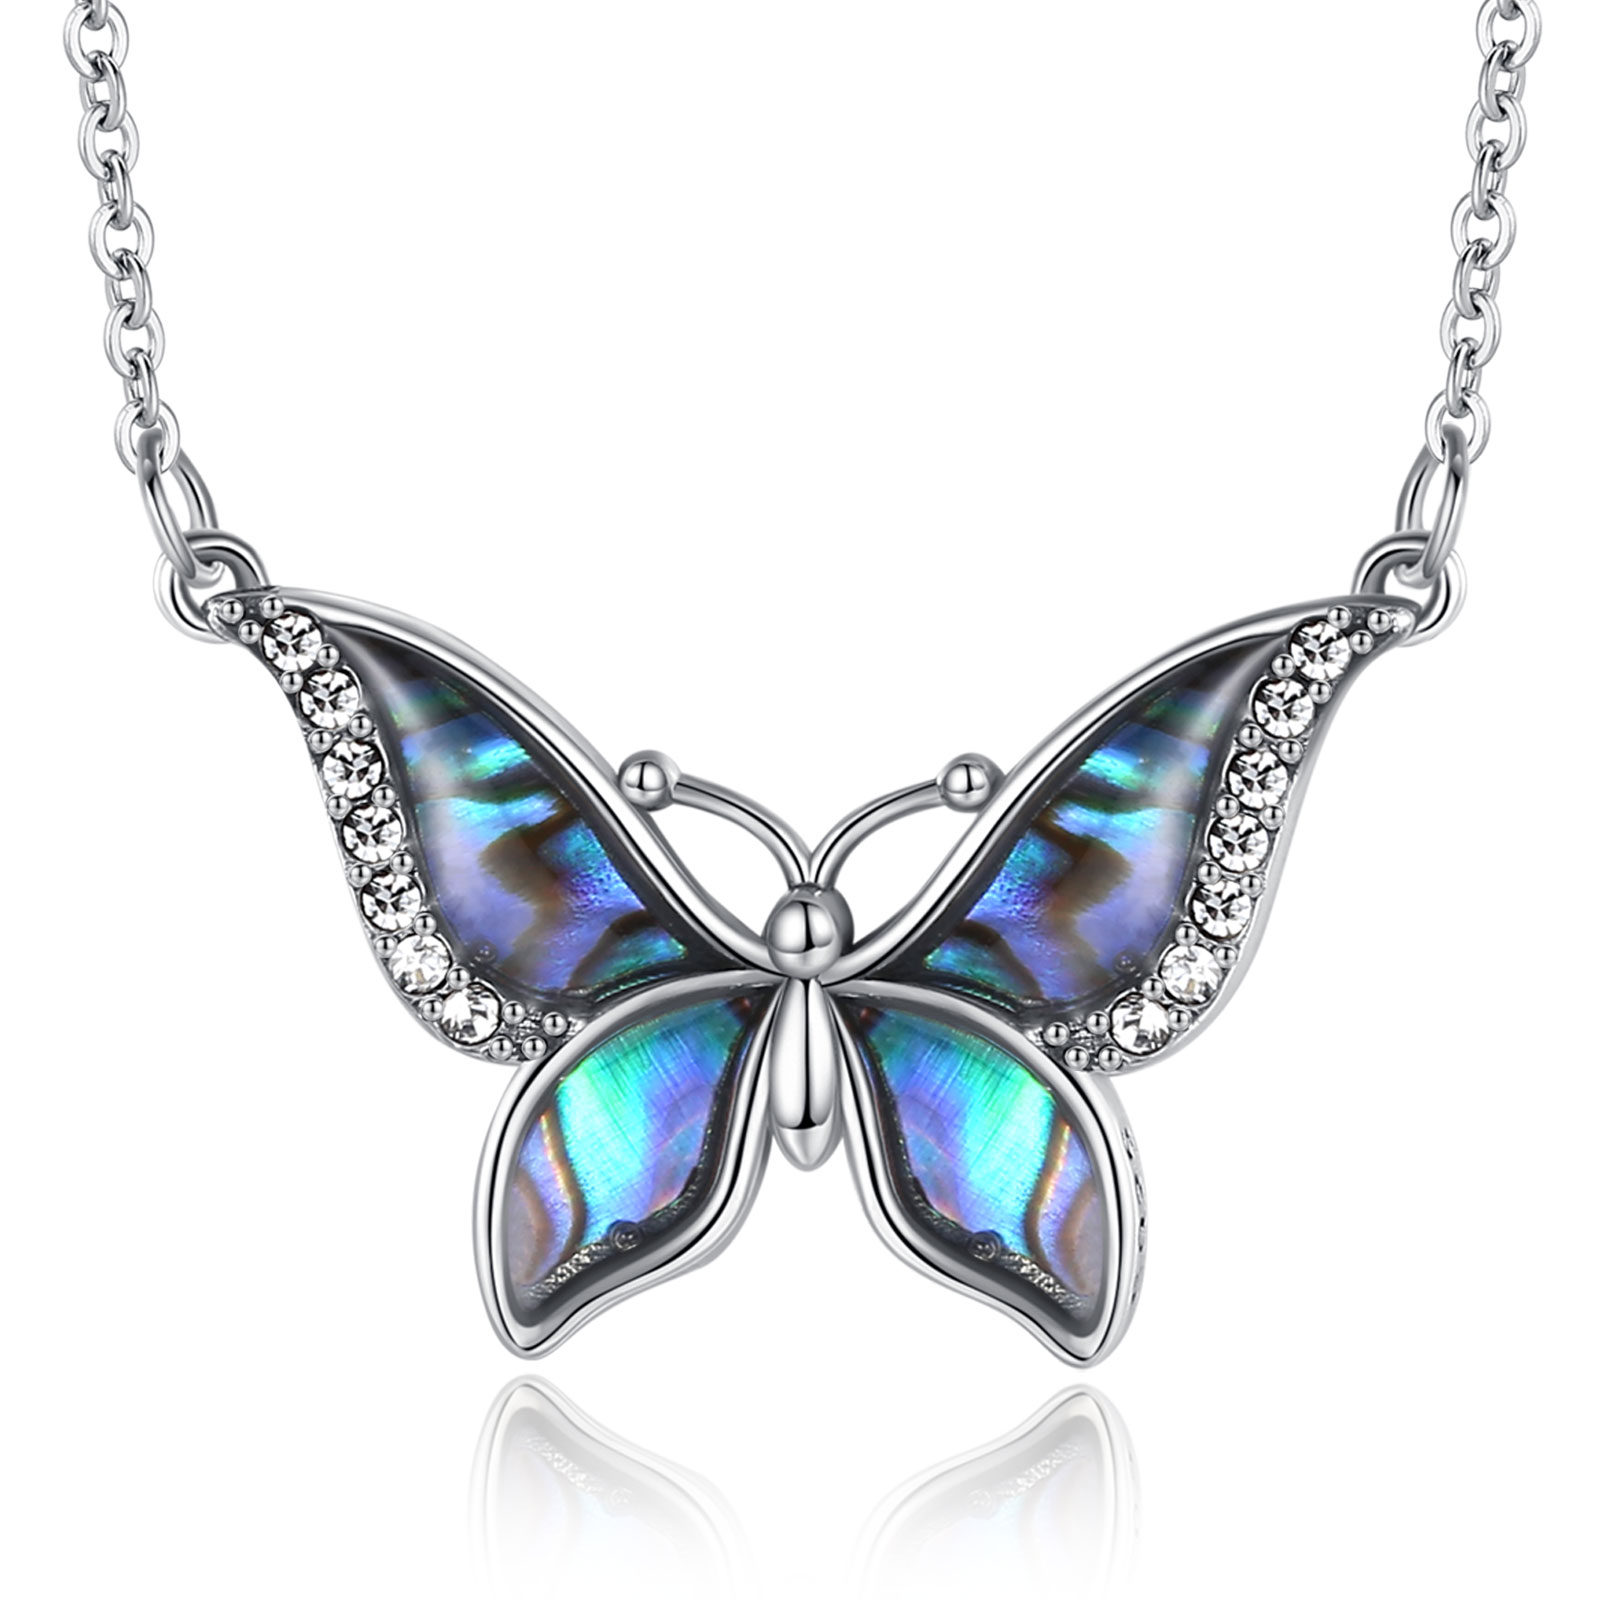 Merryshine Jewelry S925 Sterling Silver Mother of Pearl Element Butterfly Pendant Necklace for Women